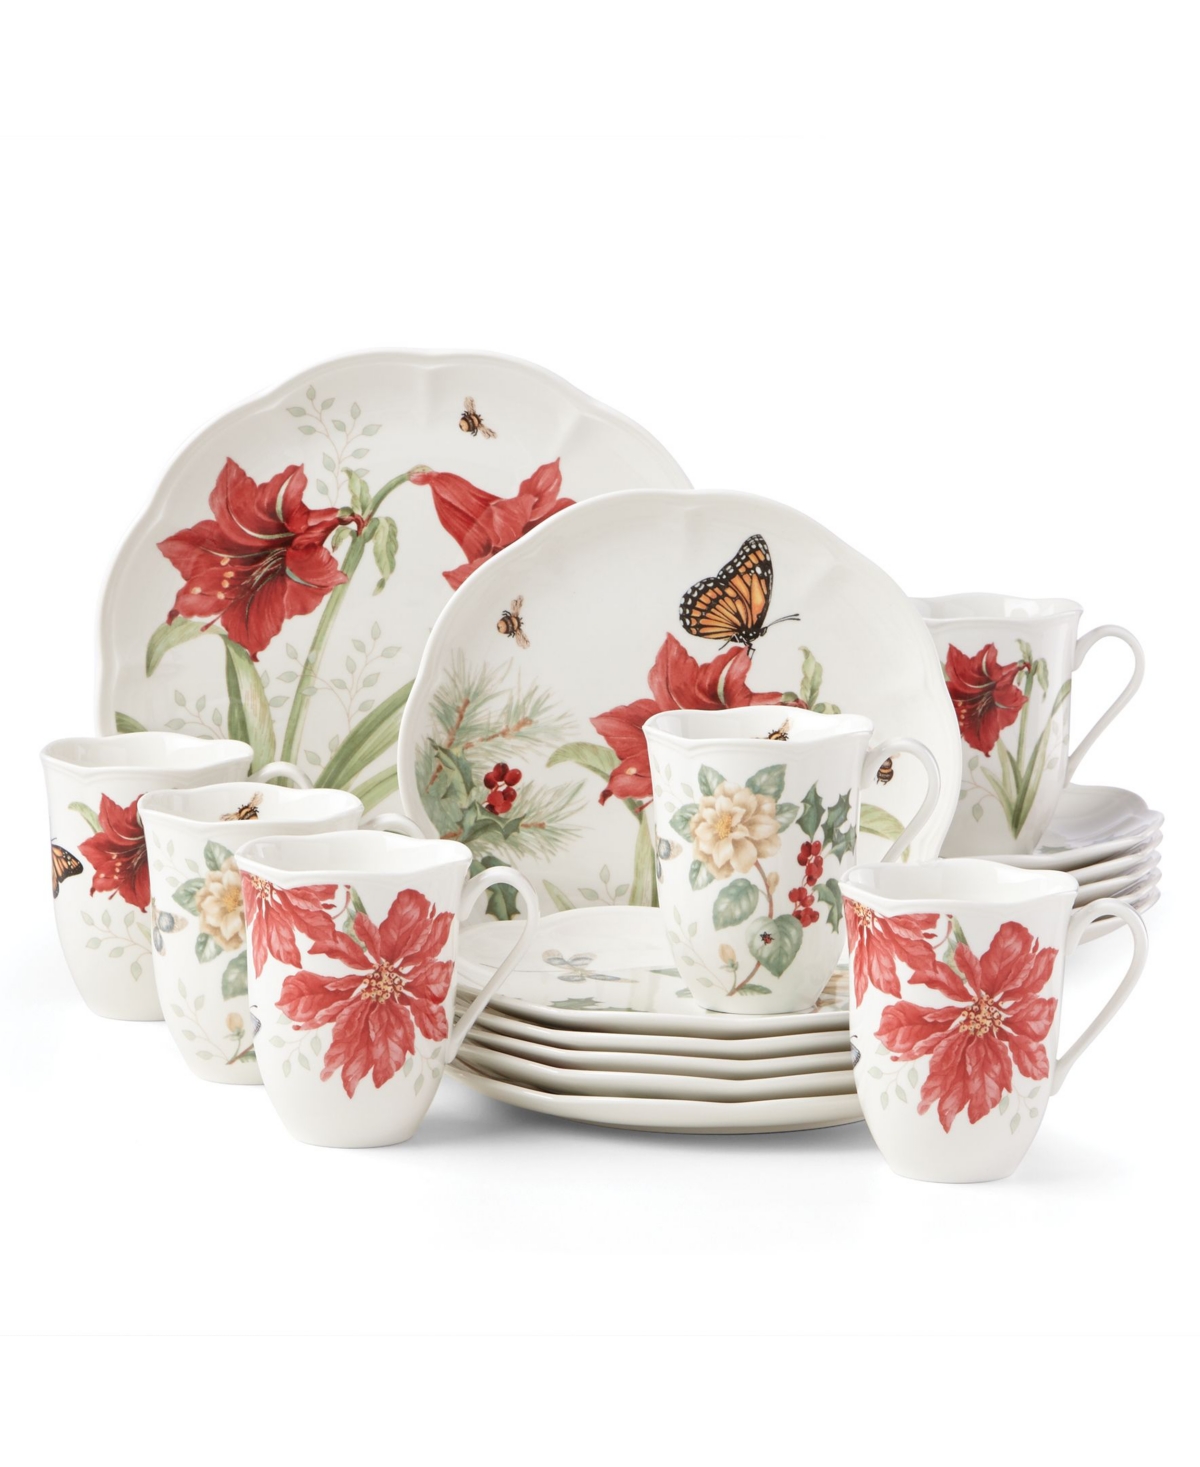 Butterfly Meadow Holiday 18-pc Dinnerware Set, Service for 6 - White Background With Multi-color Season